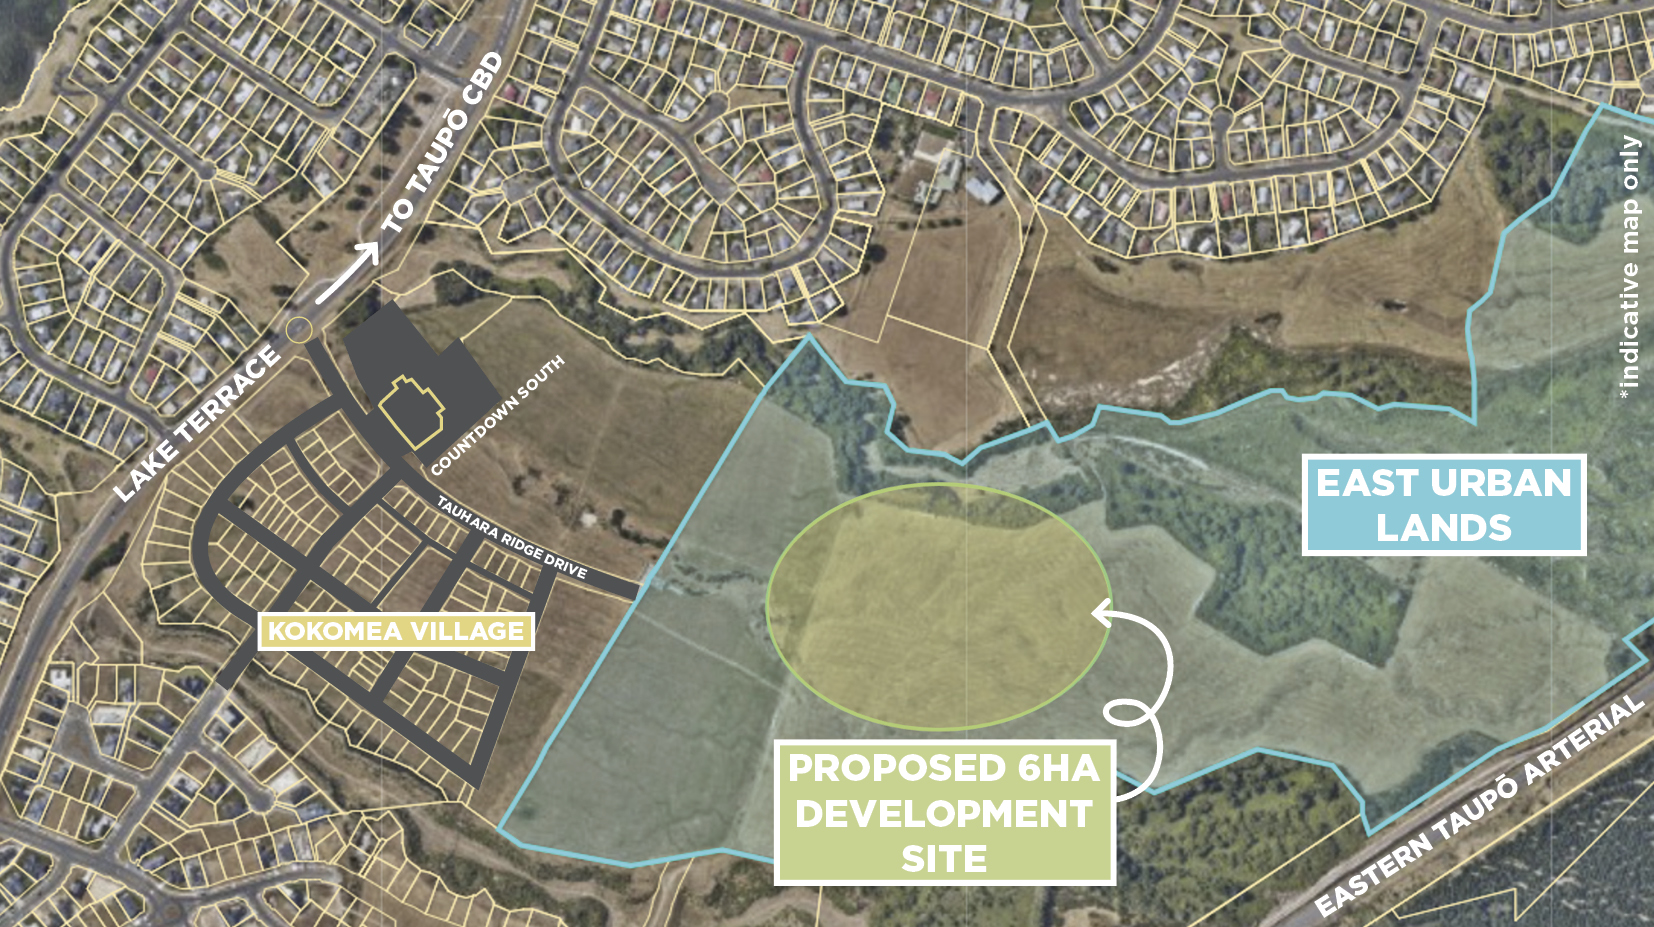 Map of the proposed development area of the East Urban Lands